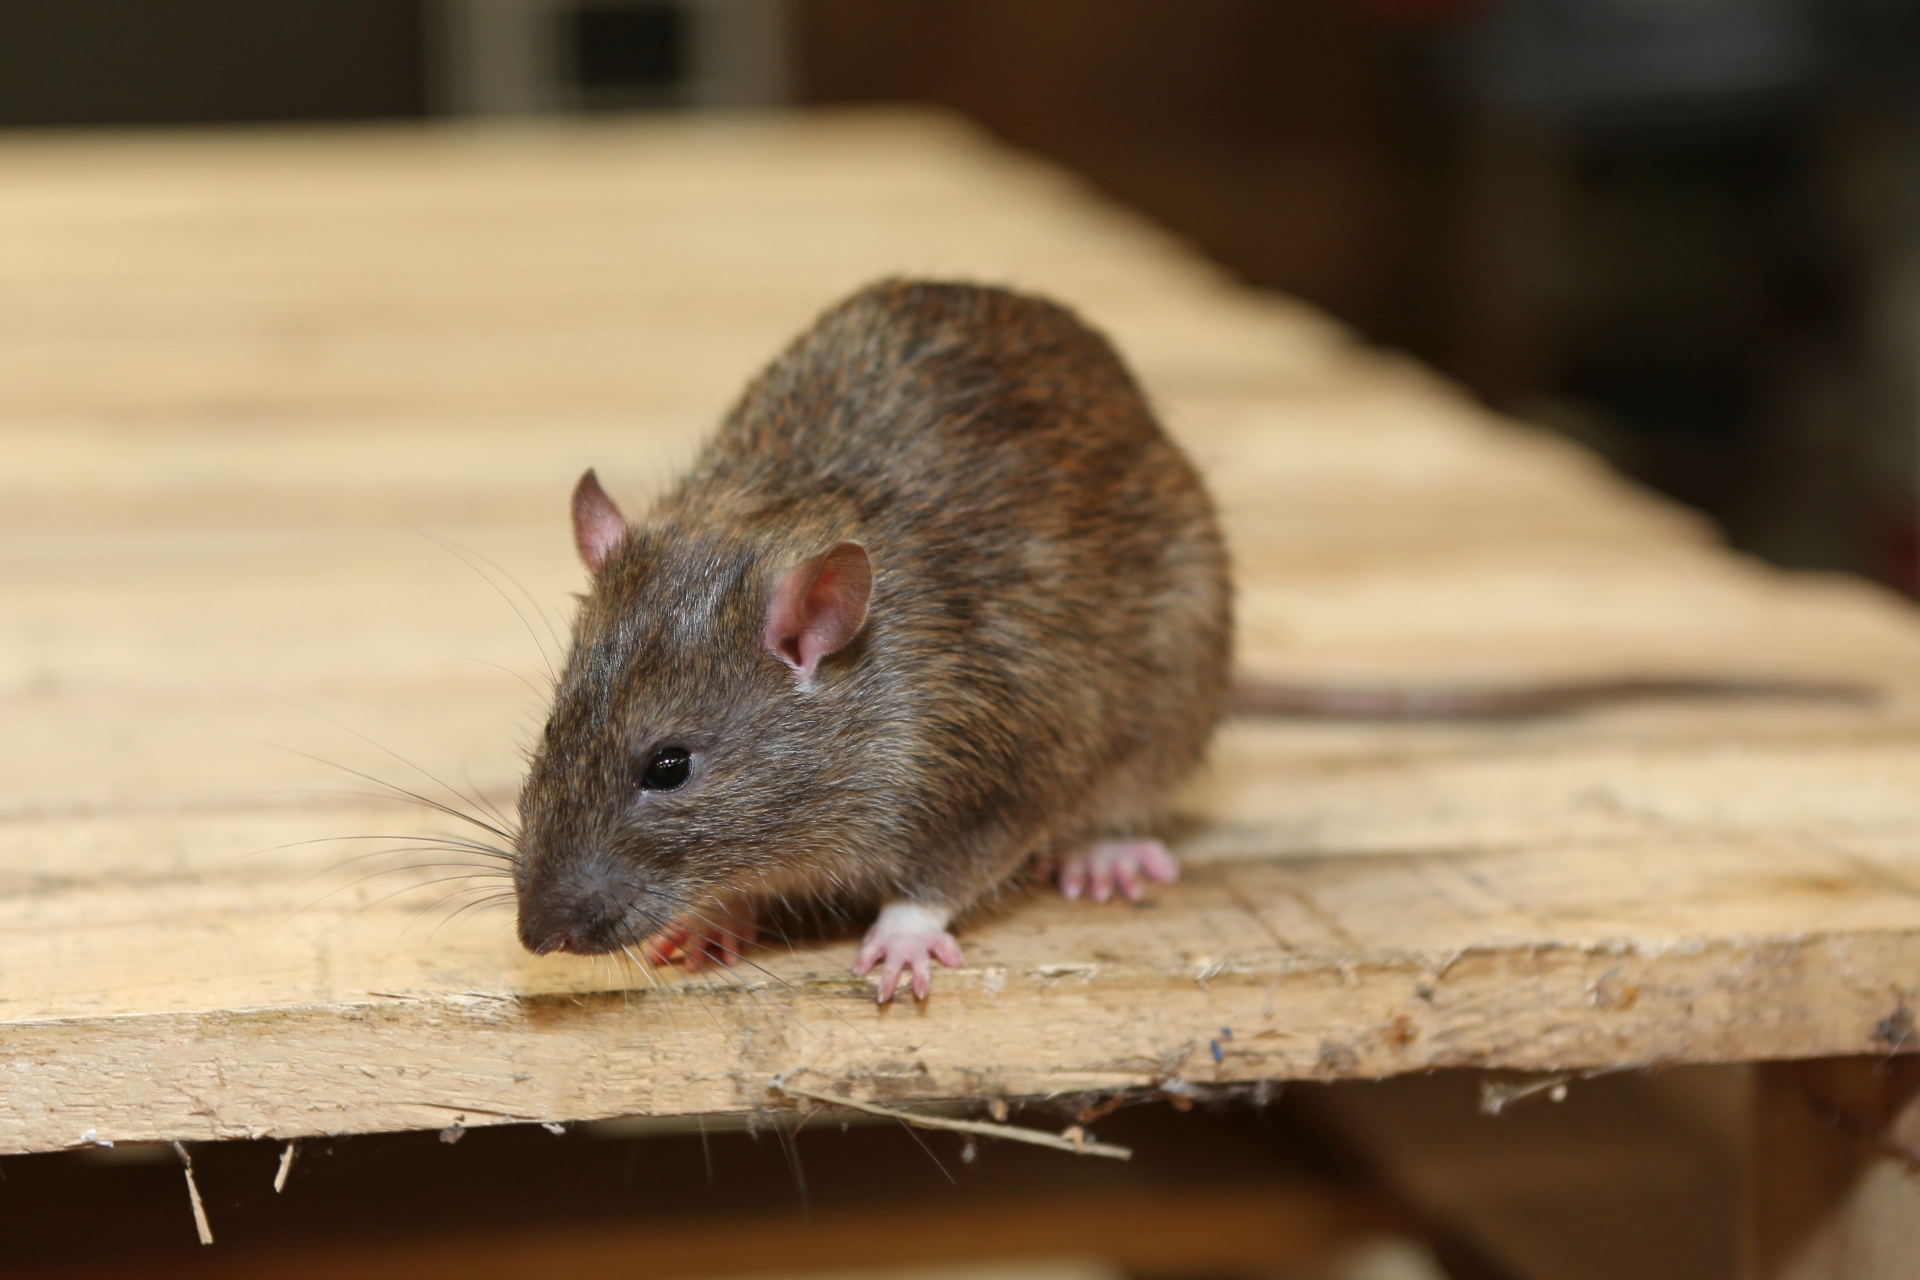 Rat extermination, Pest Control in Staines-upon-Thames, Egham Hythe, TW18. Call Now 020 8166 9746